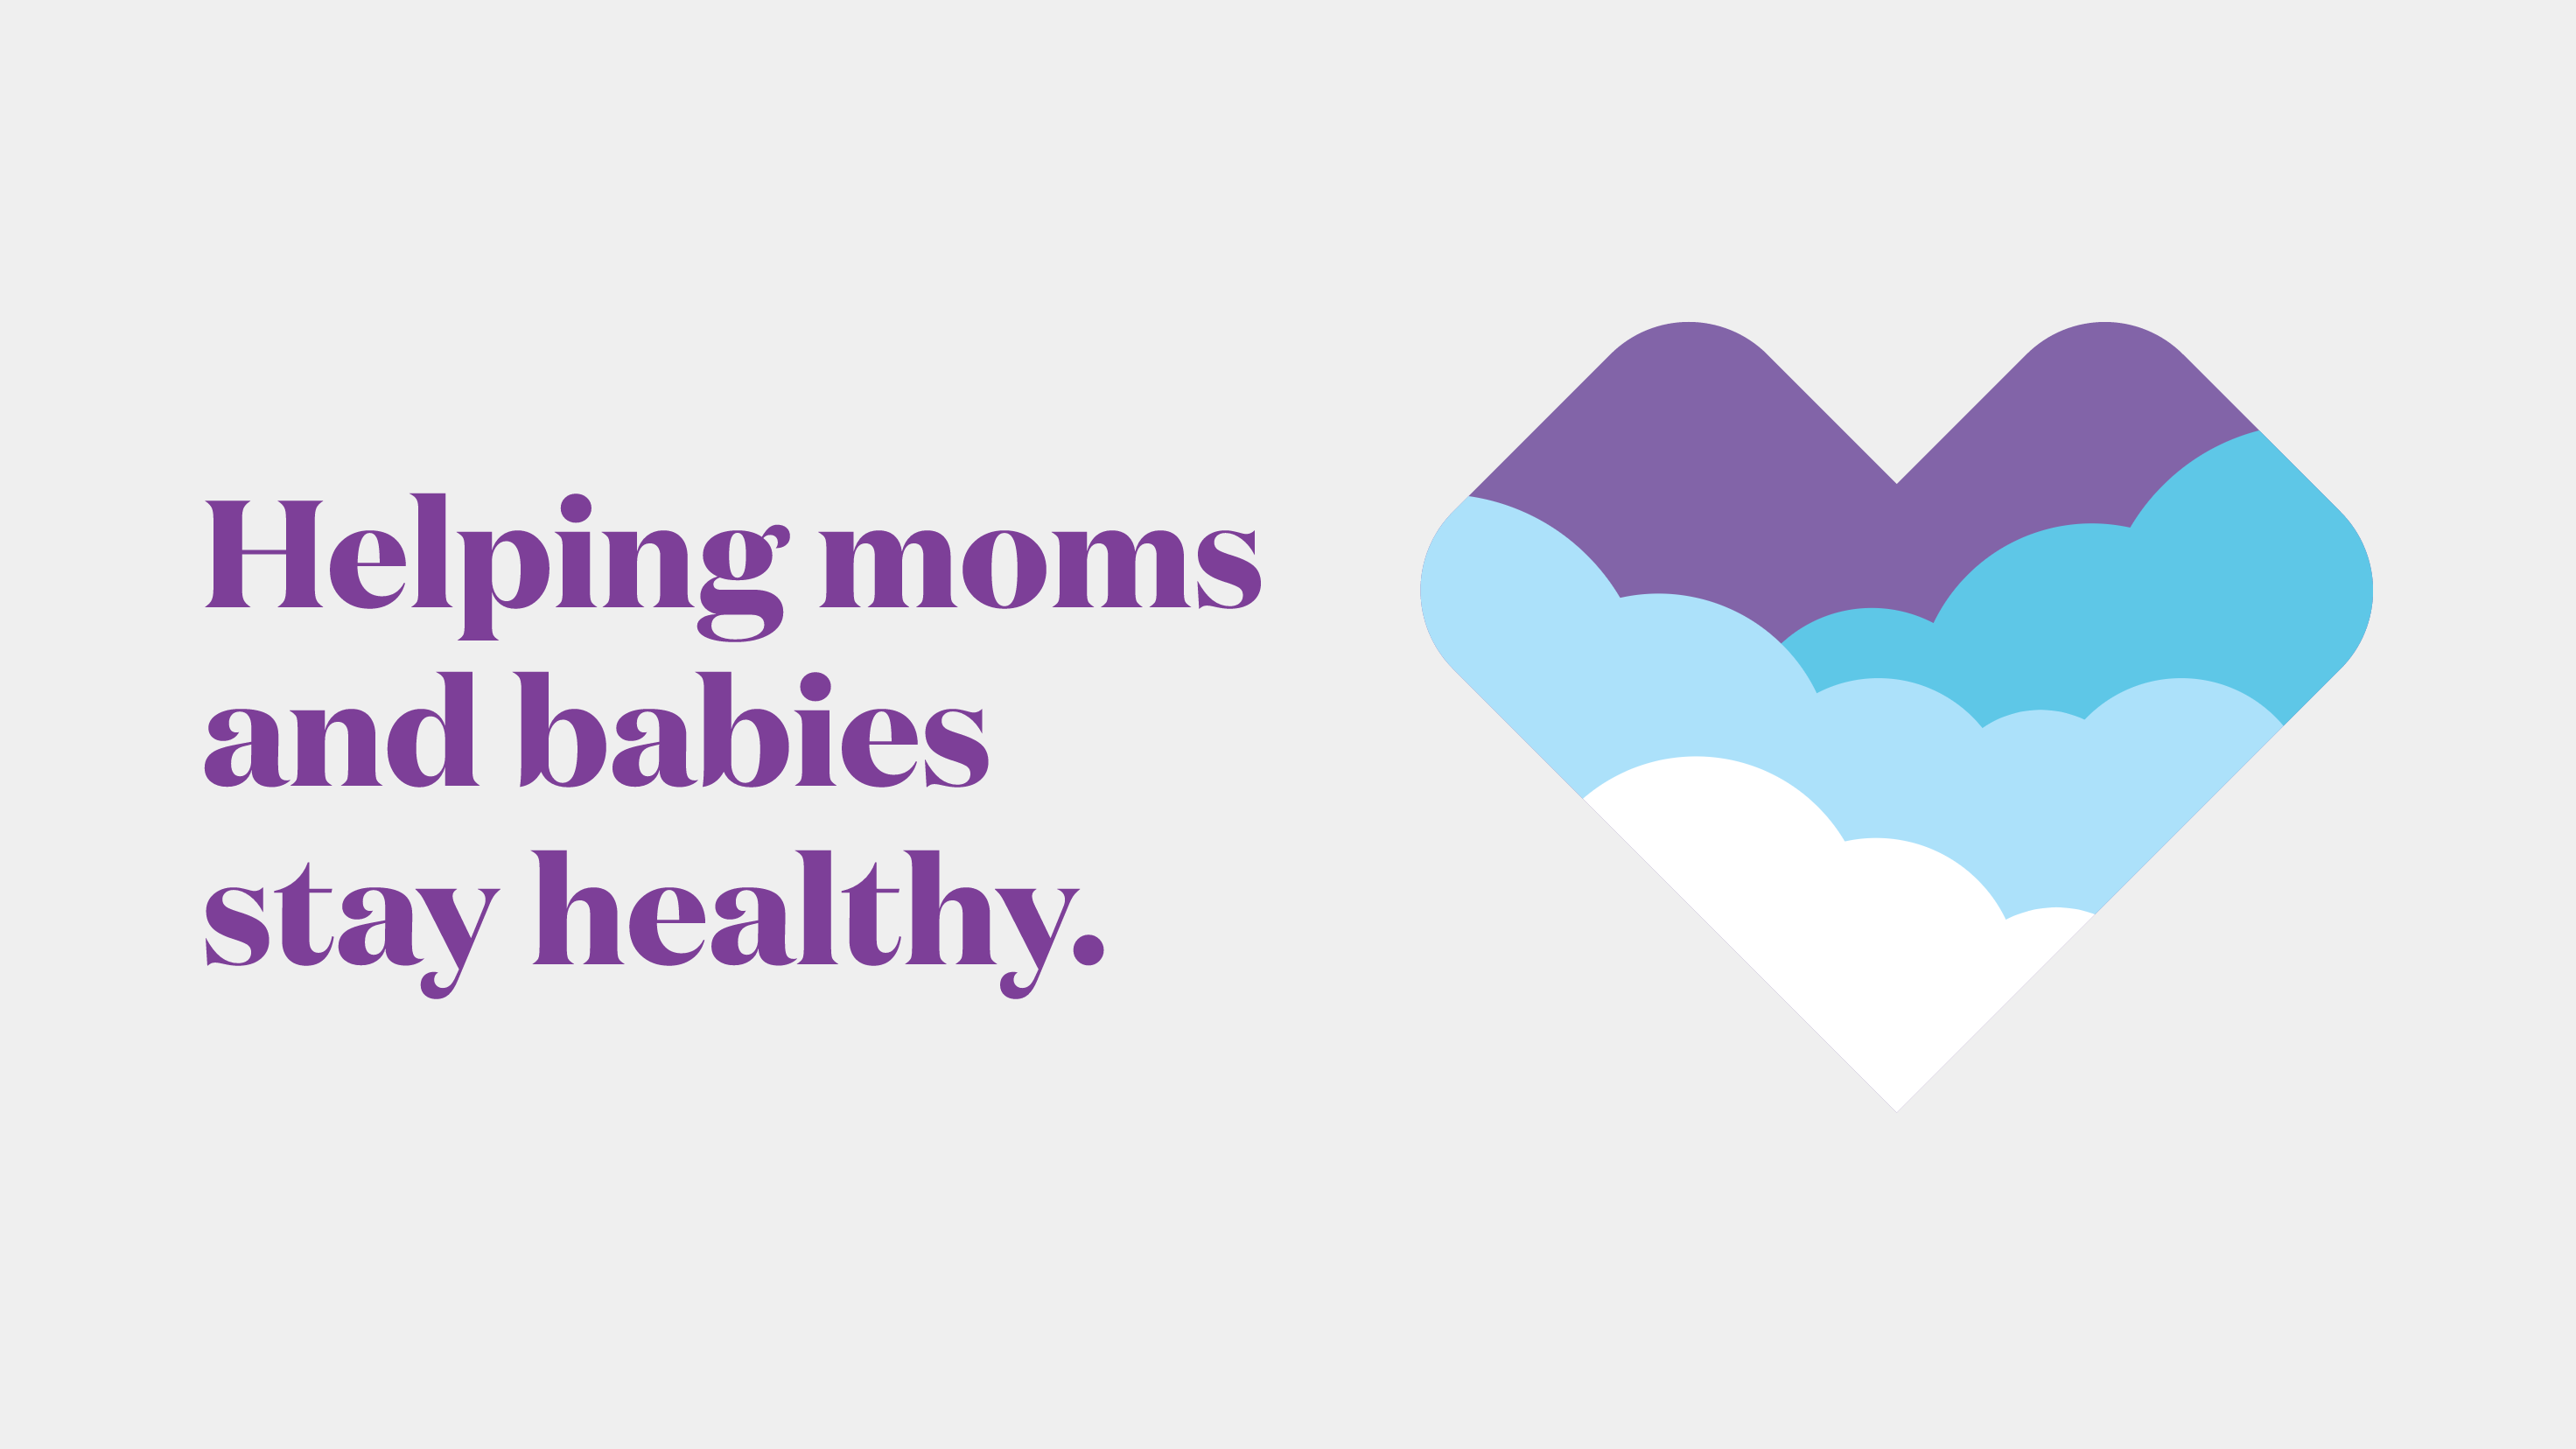 Helping moms and babies stay healthy